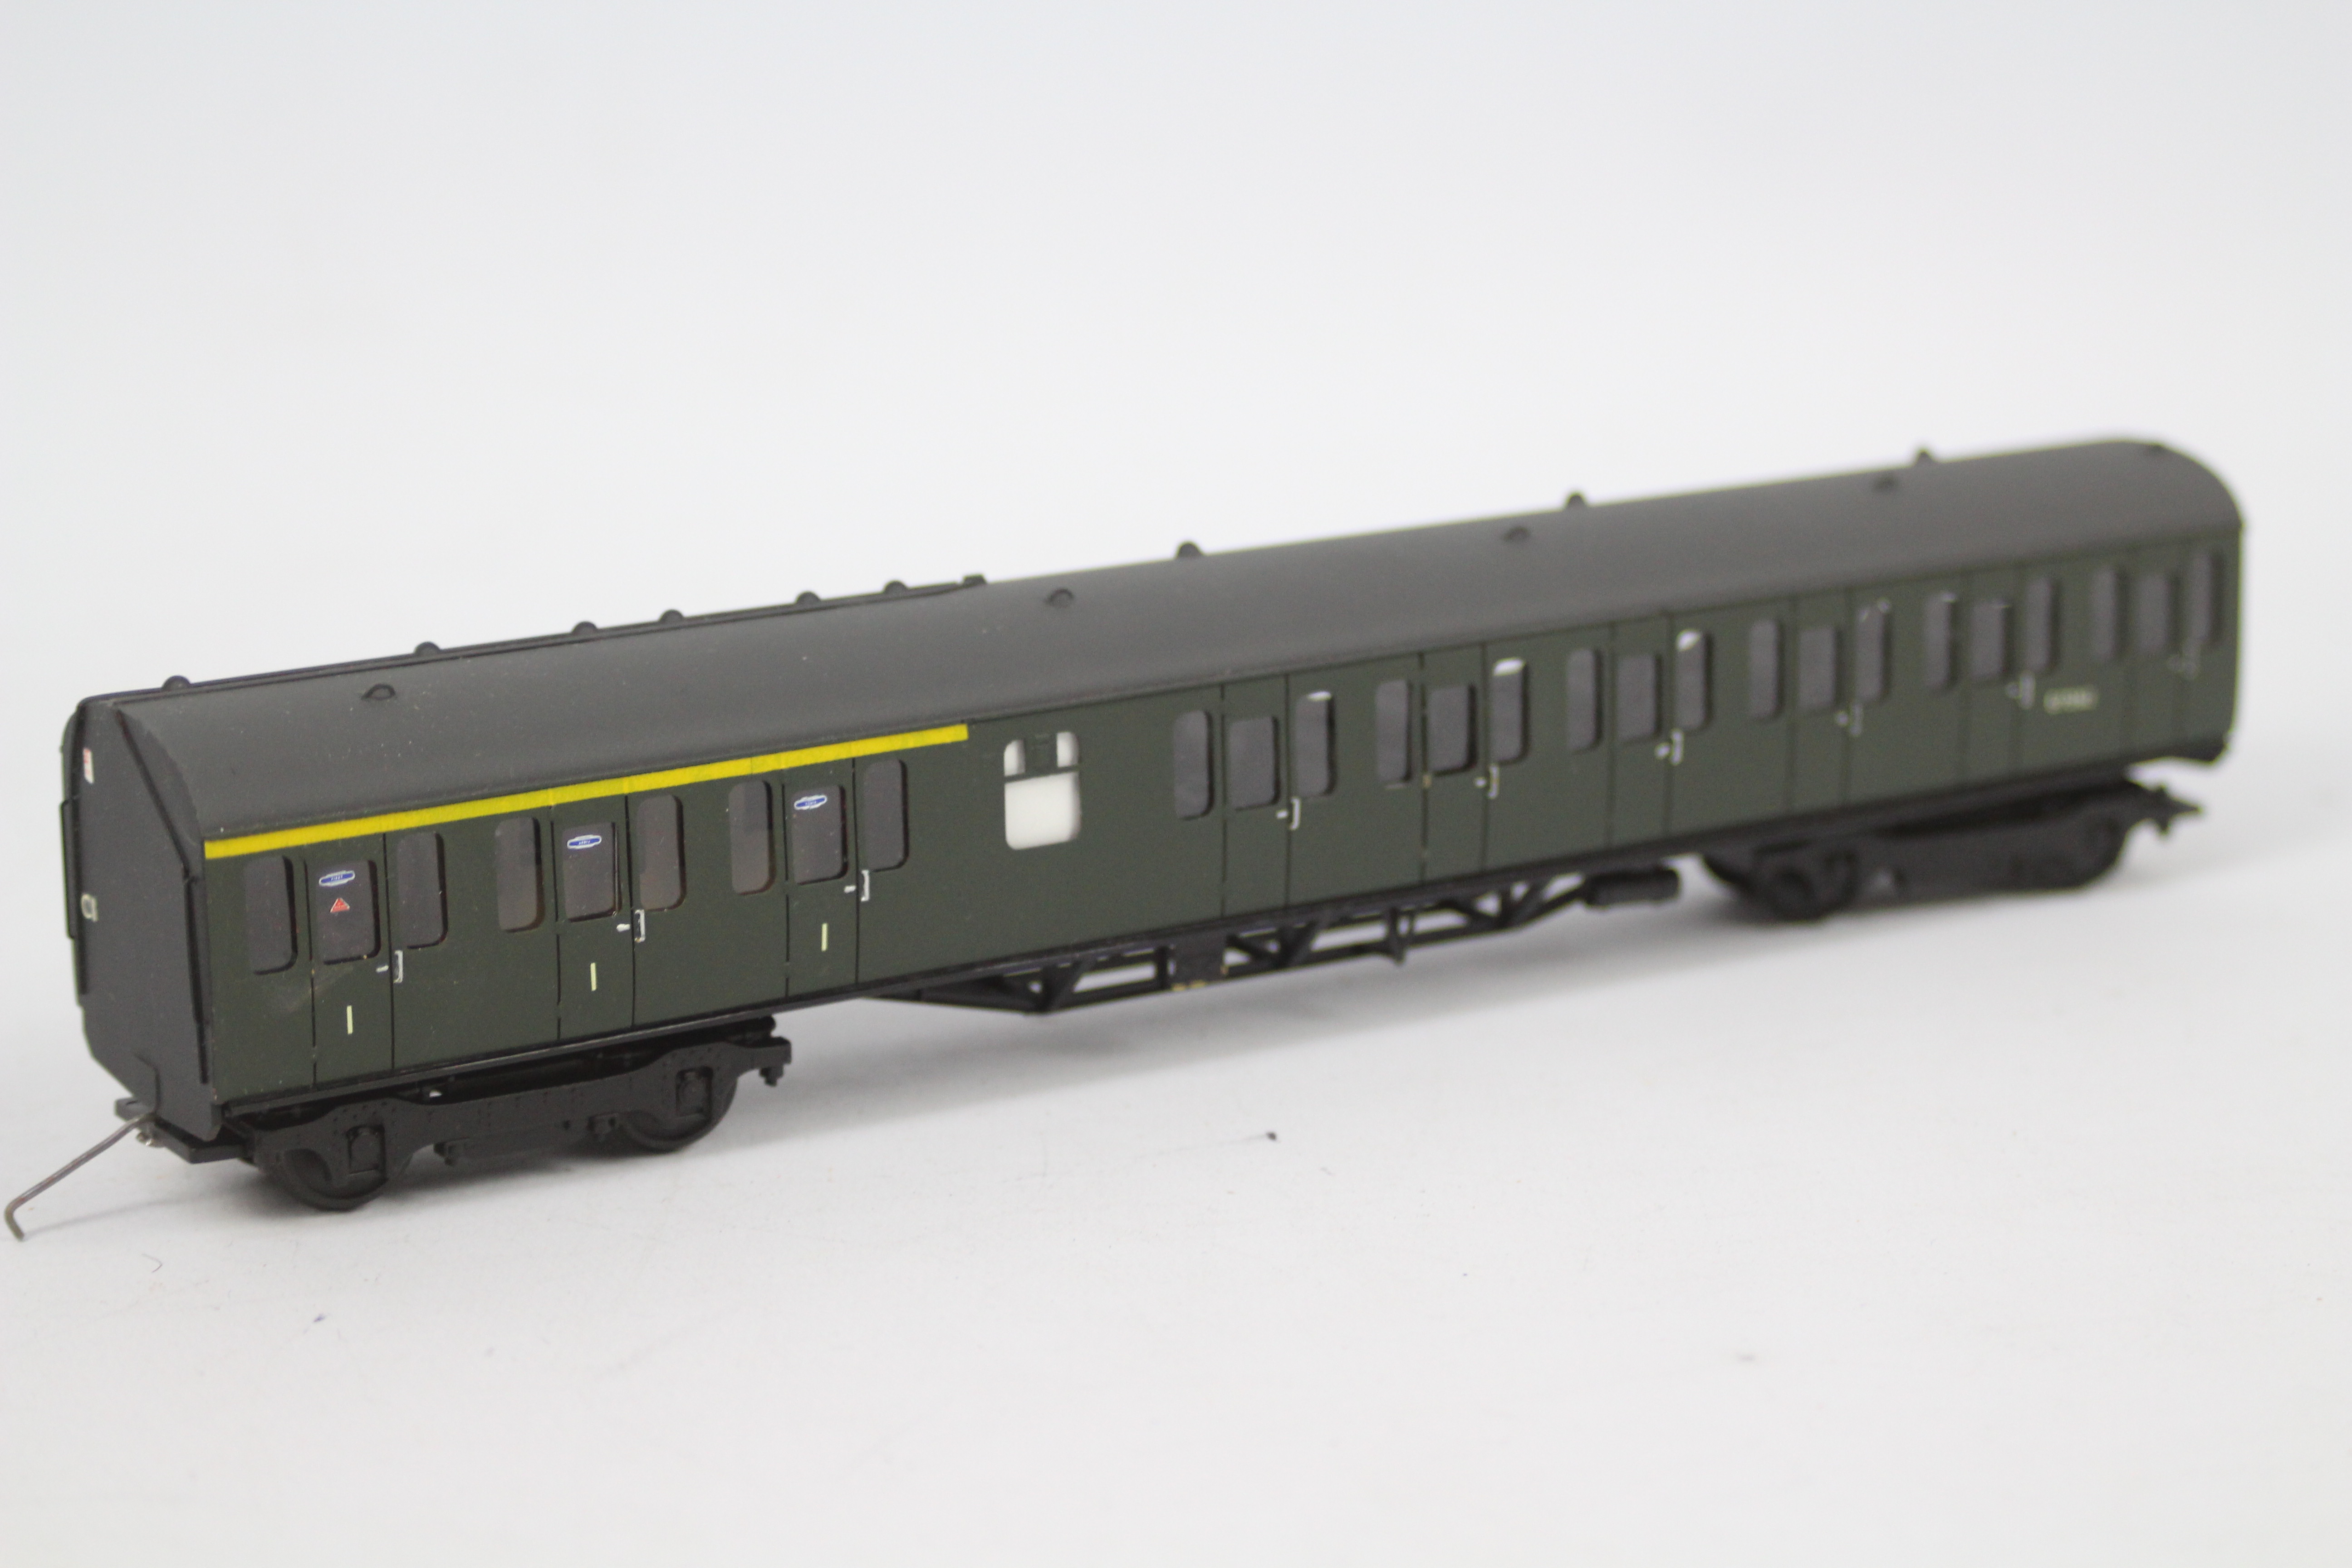 DC Kits - An unboxed OO gauge Class 304 EMU 4 car set in BR livery. - Image 5 of 5